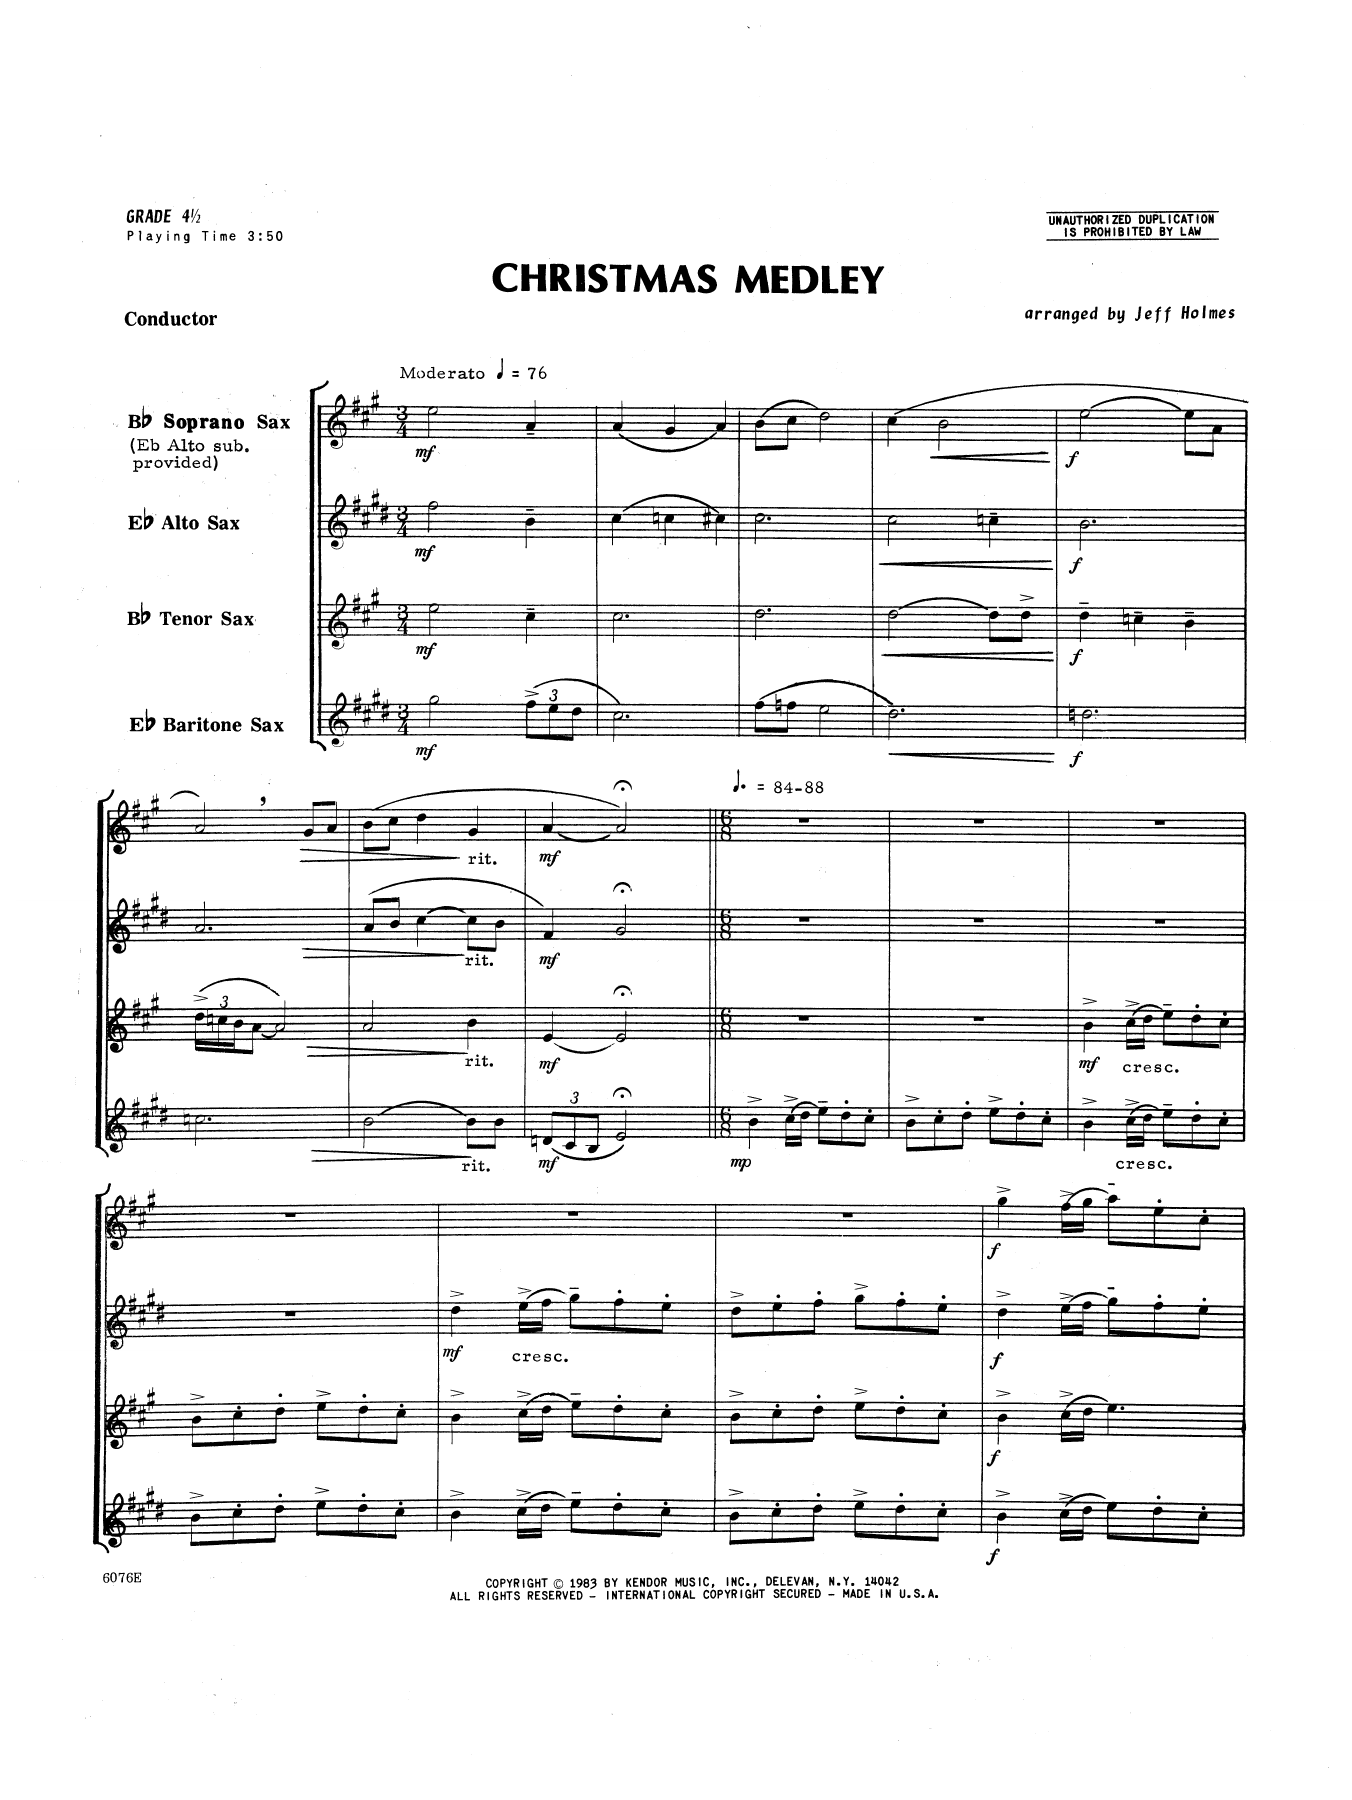 Holmes Christmas Medley - Full Score sheet music notes and chords. Download Printable PDF.